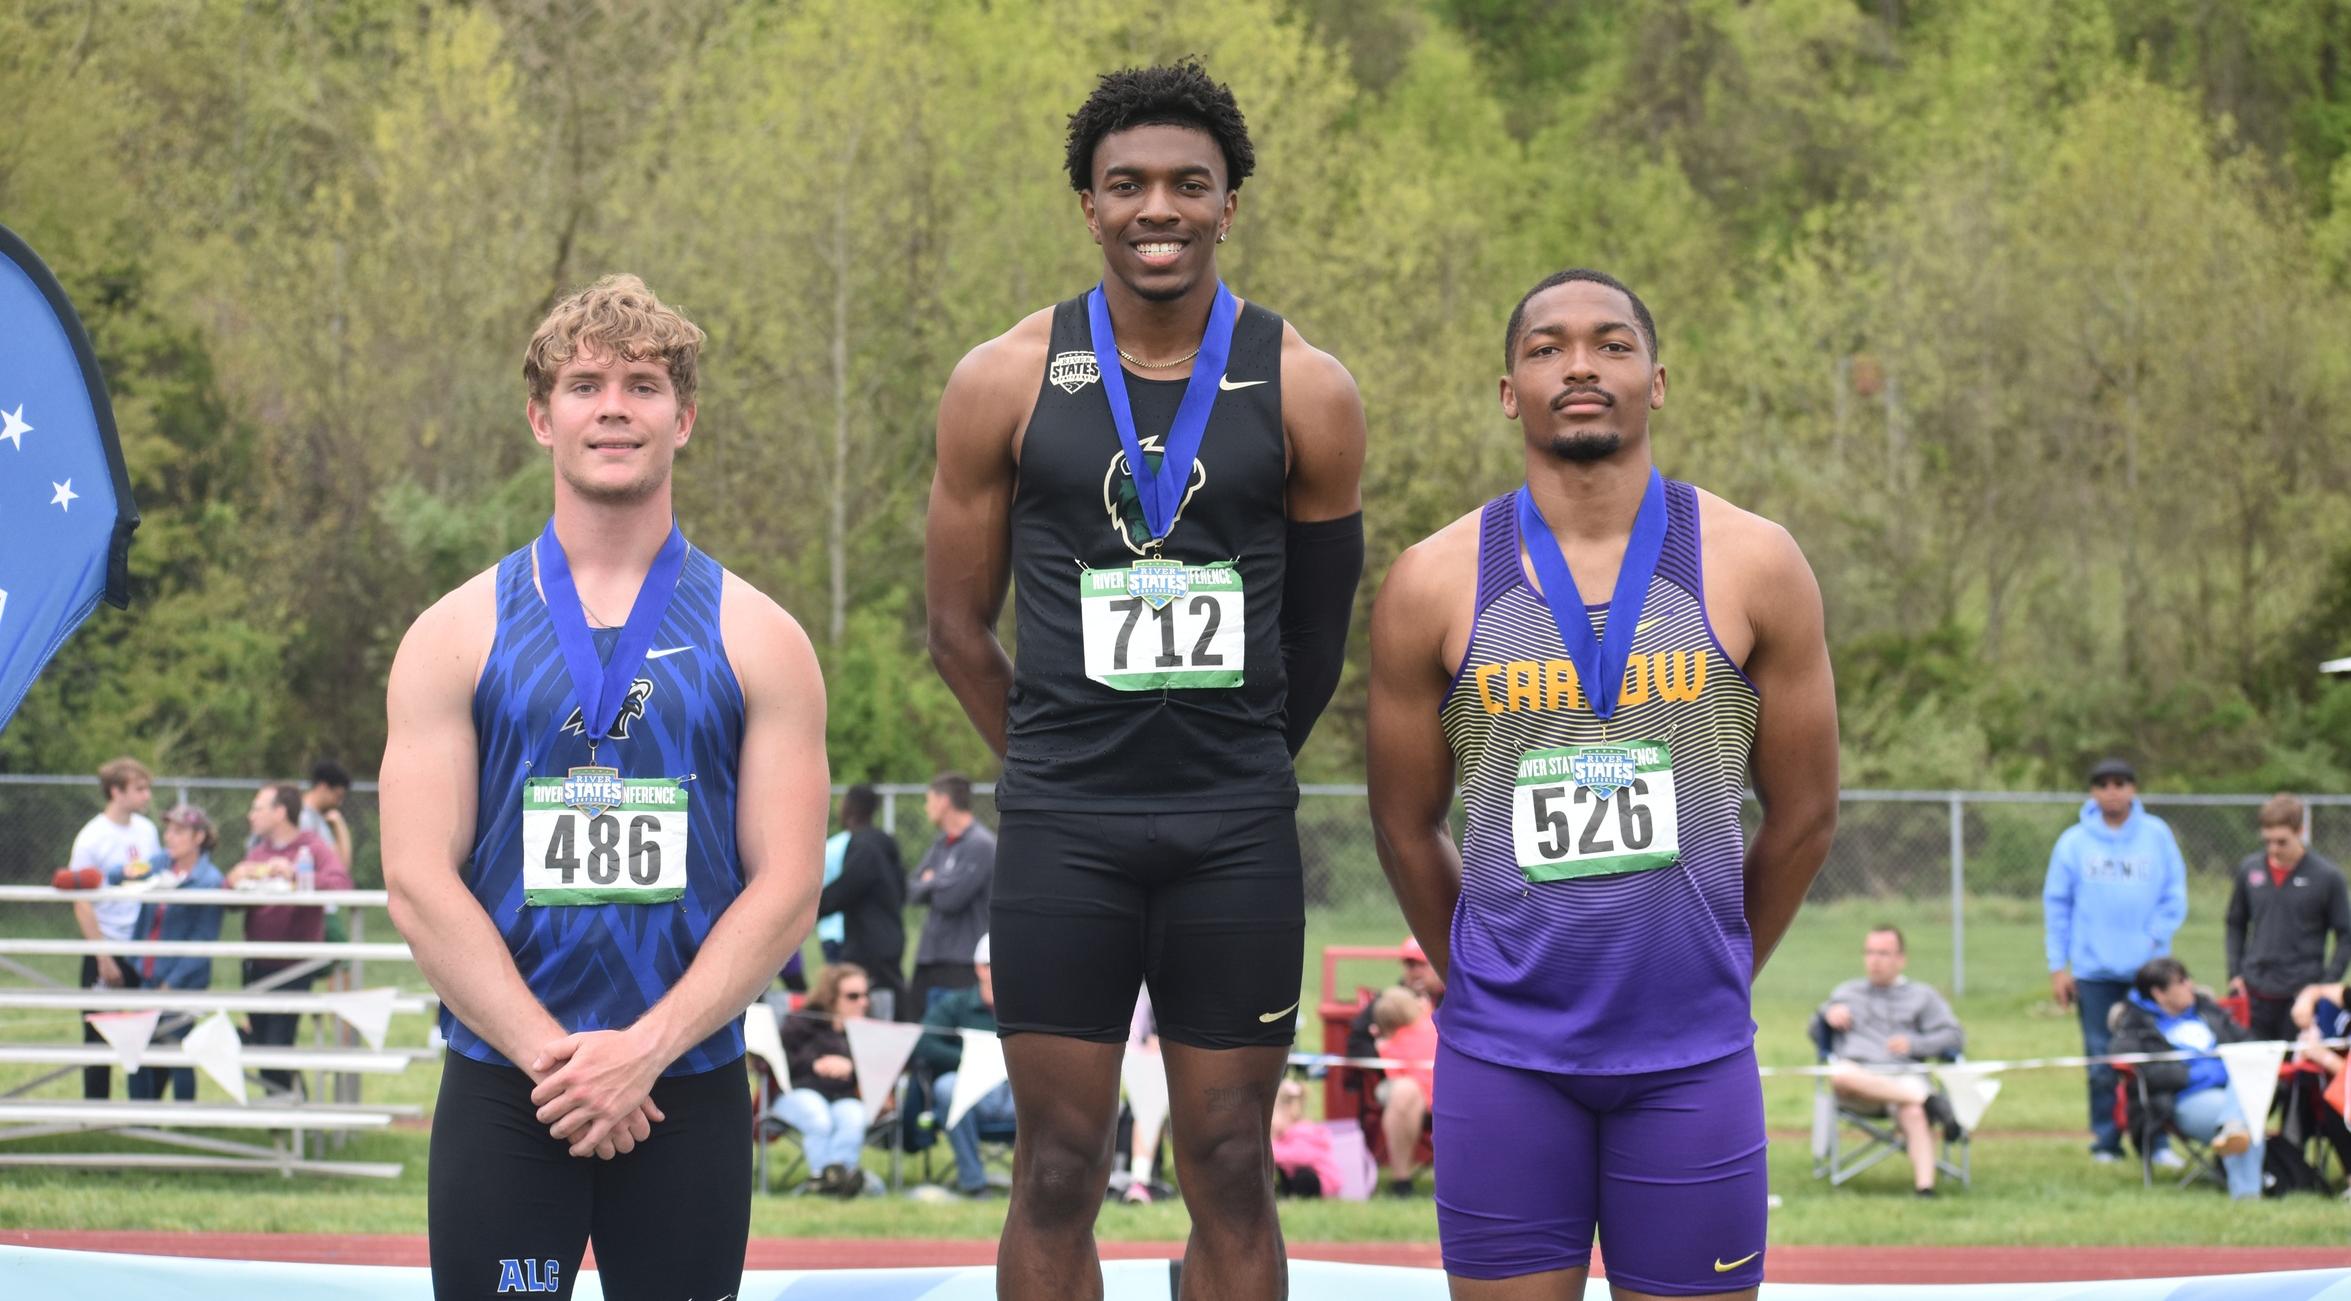 On the right: Tyhir Royster in second place on the podium. Photo courtesy of RSC Sports Information.